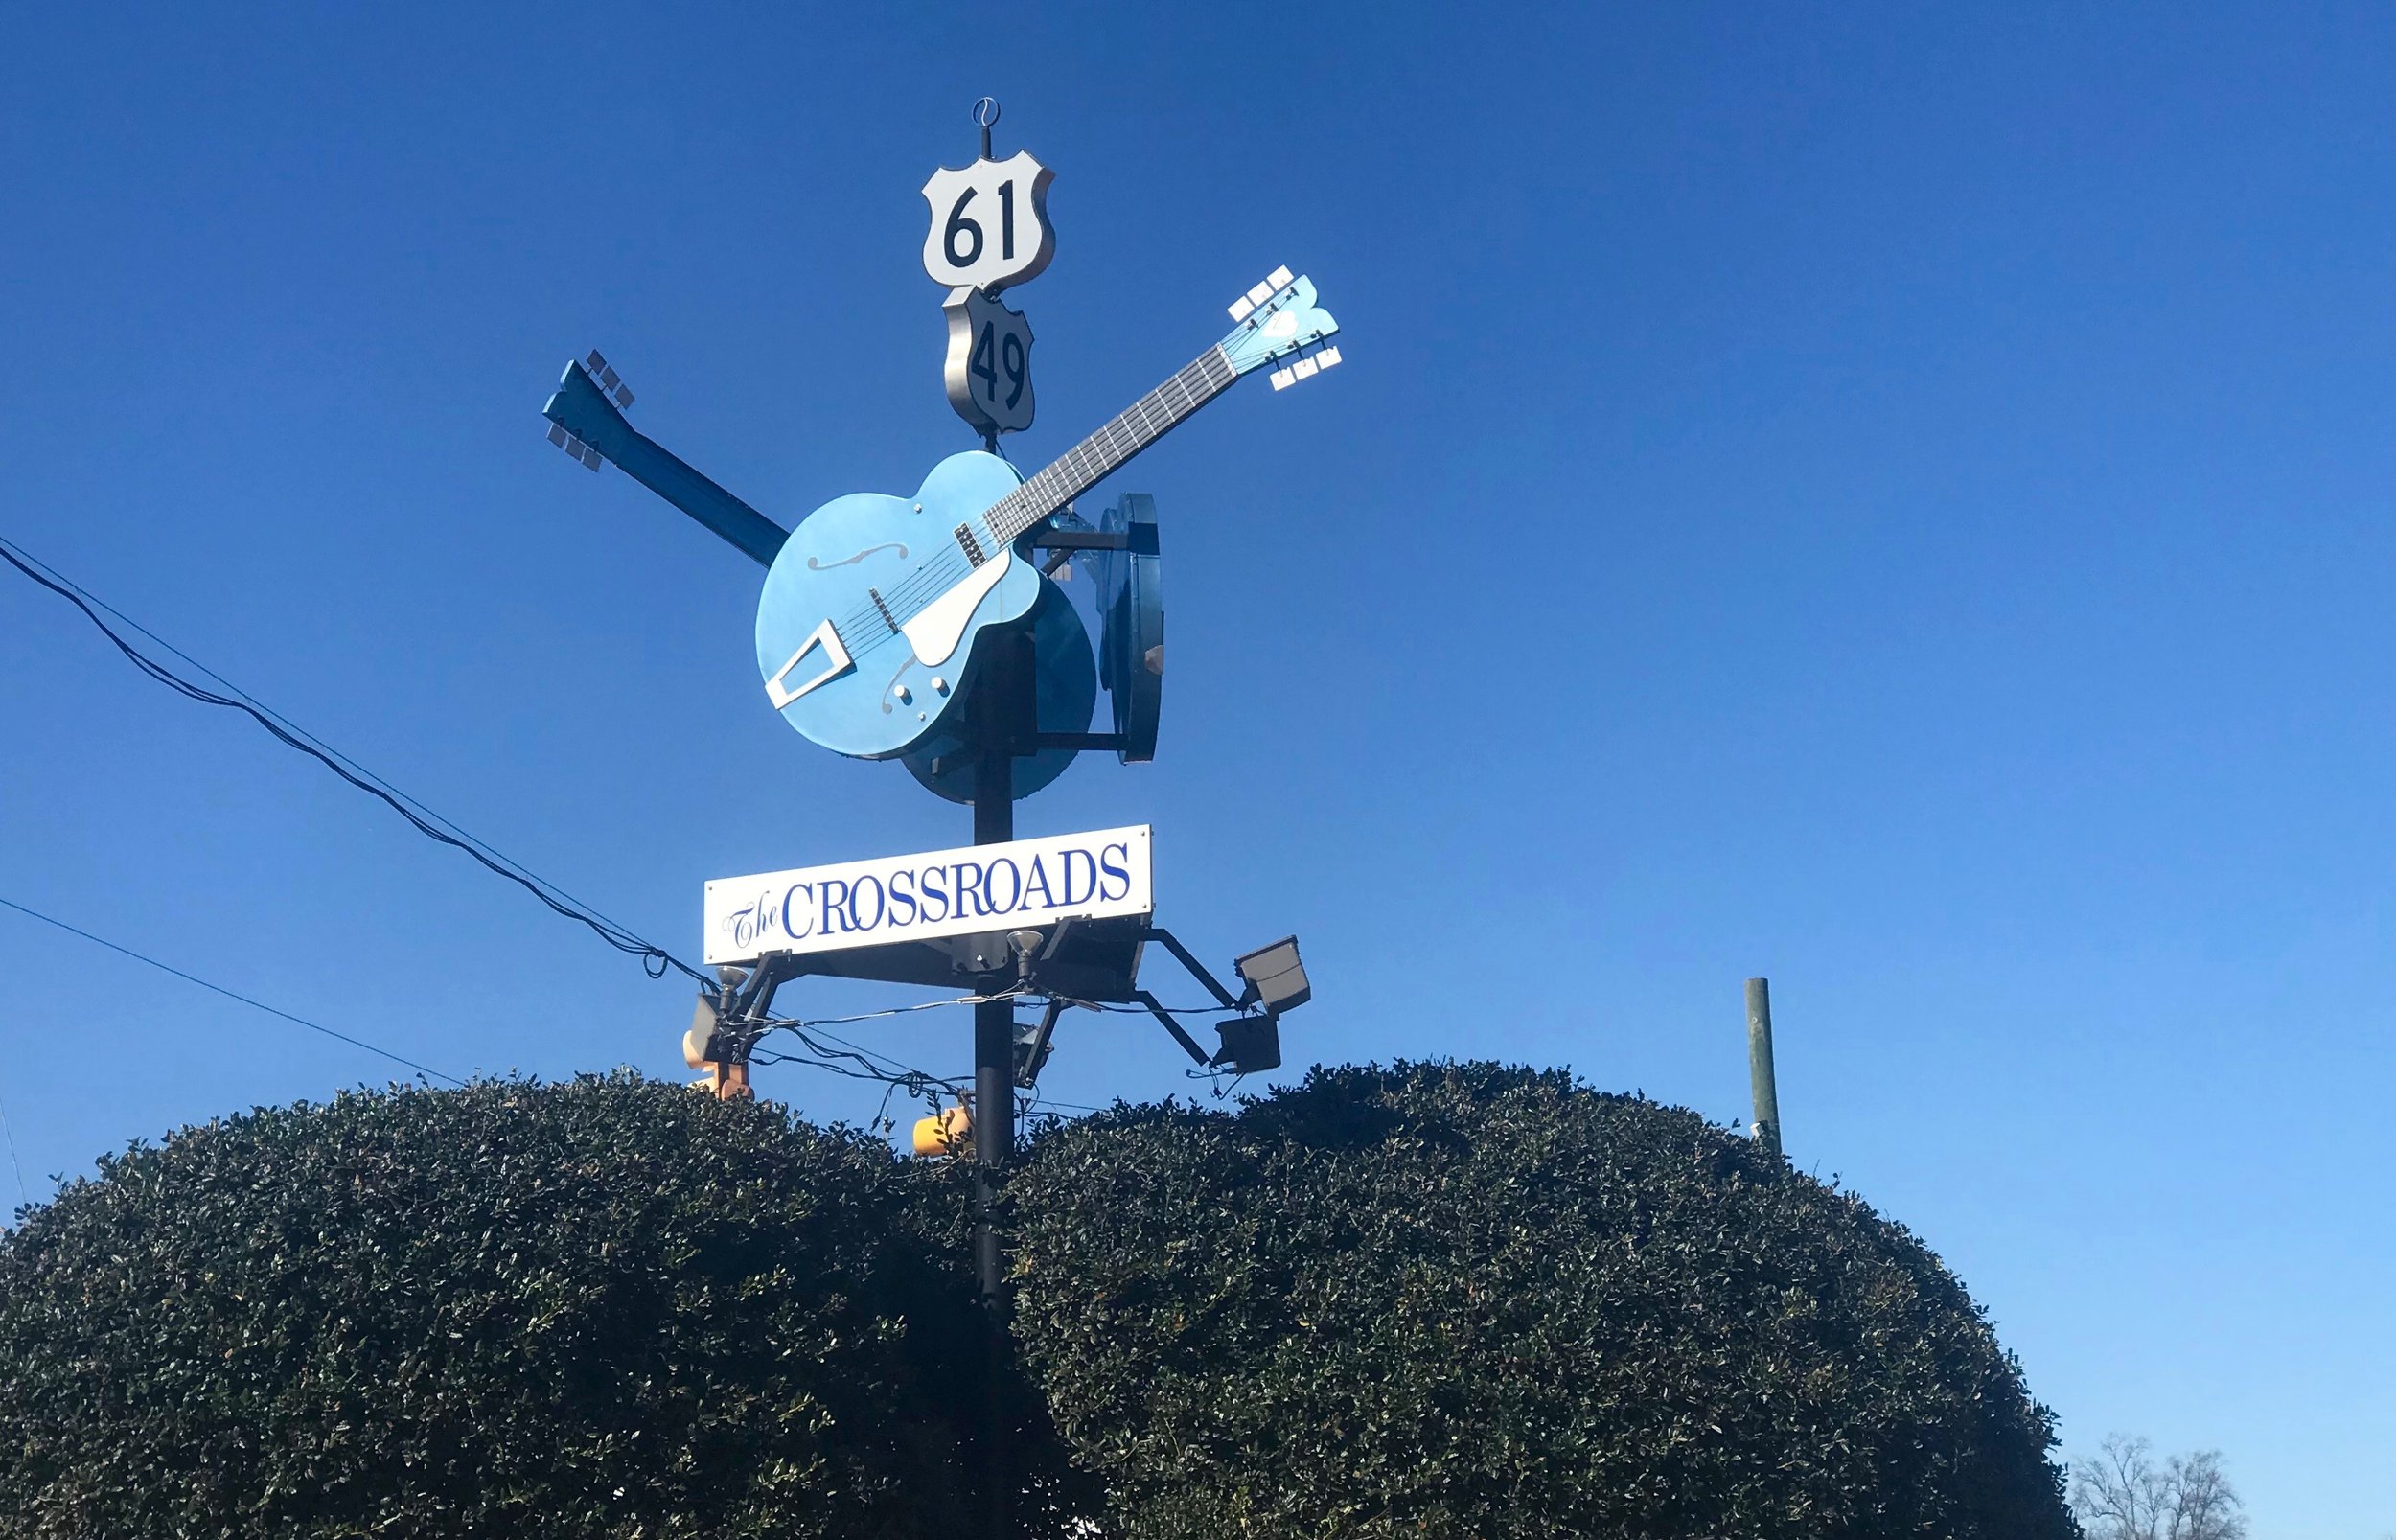  Sign in Clarksdale, Miss. celebrates the crossroads where, according to blues legend, Robert Johnson met the devil. 